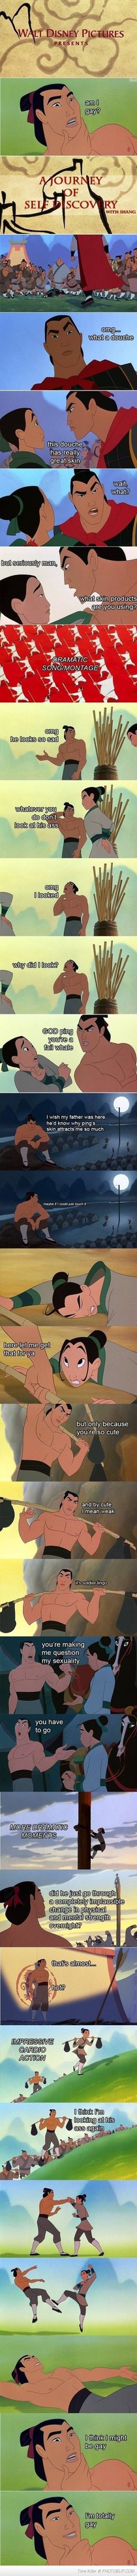 The REAL story behind Mulan Self-Discovery